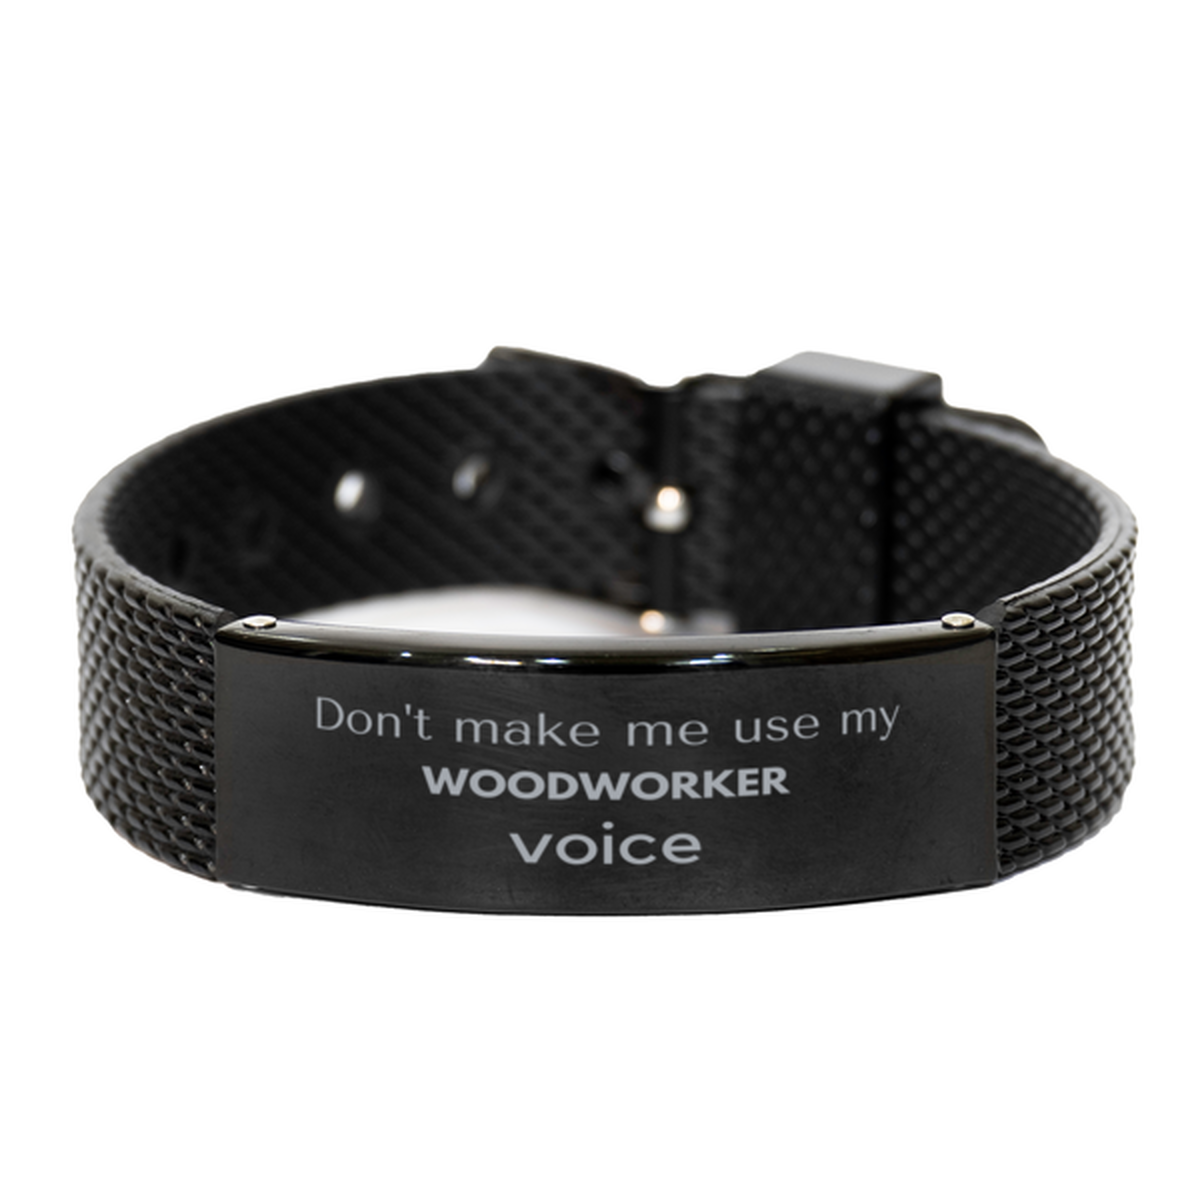 Don't make me use my Woodworker voice, Sarcasm Woodworker Gifts, Christmas Woodworker Black Shark Mesh Bracelet Birthday Unique Gifts For Woodworker Coworkers, Men, Women, Colleague, Friends